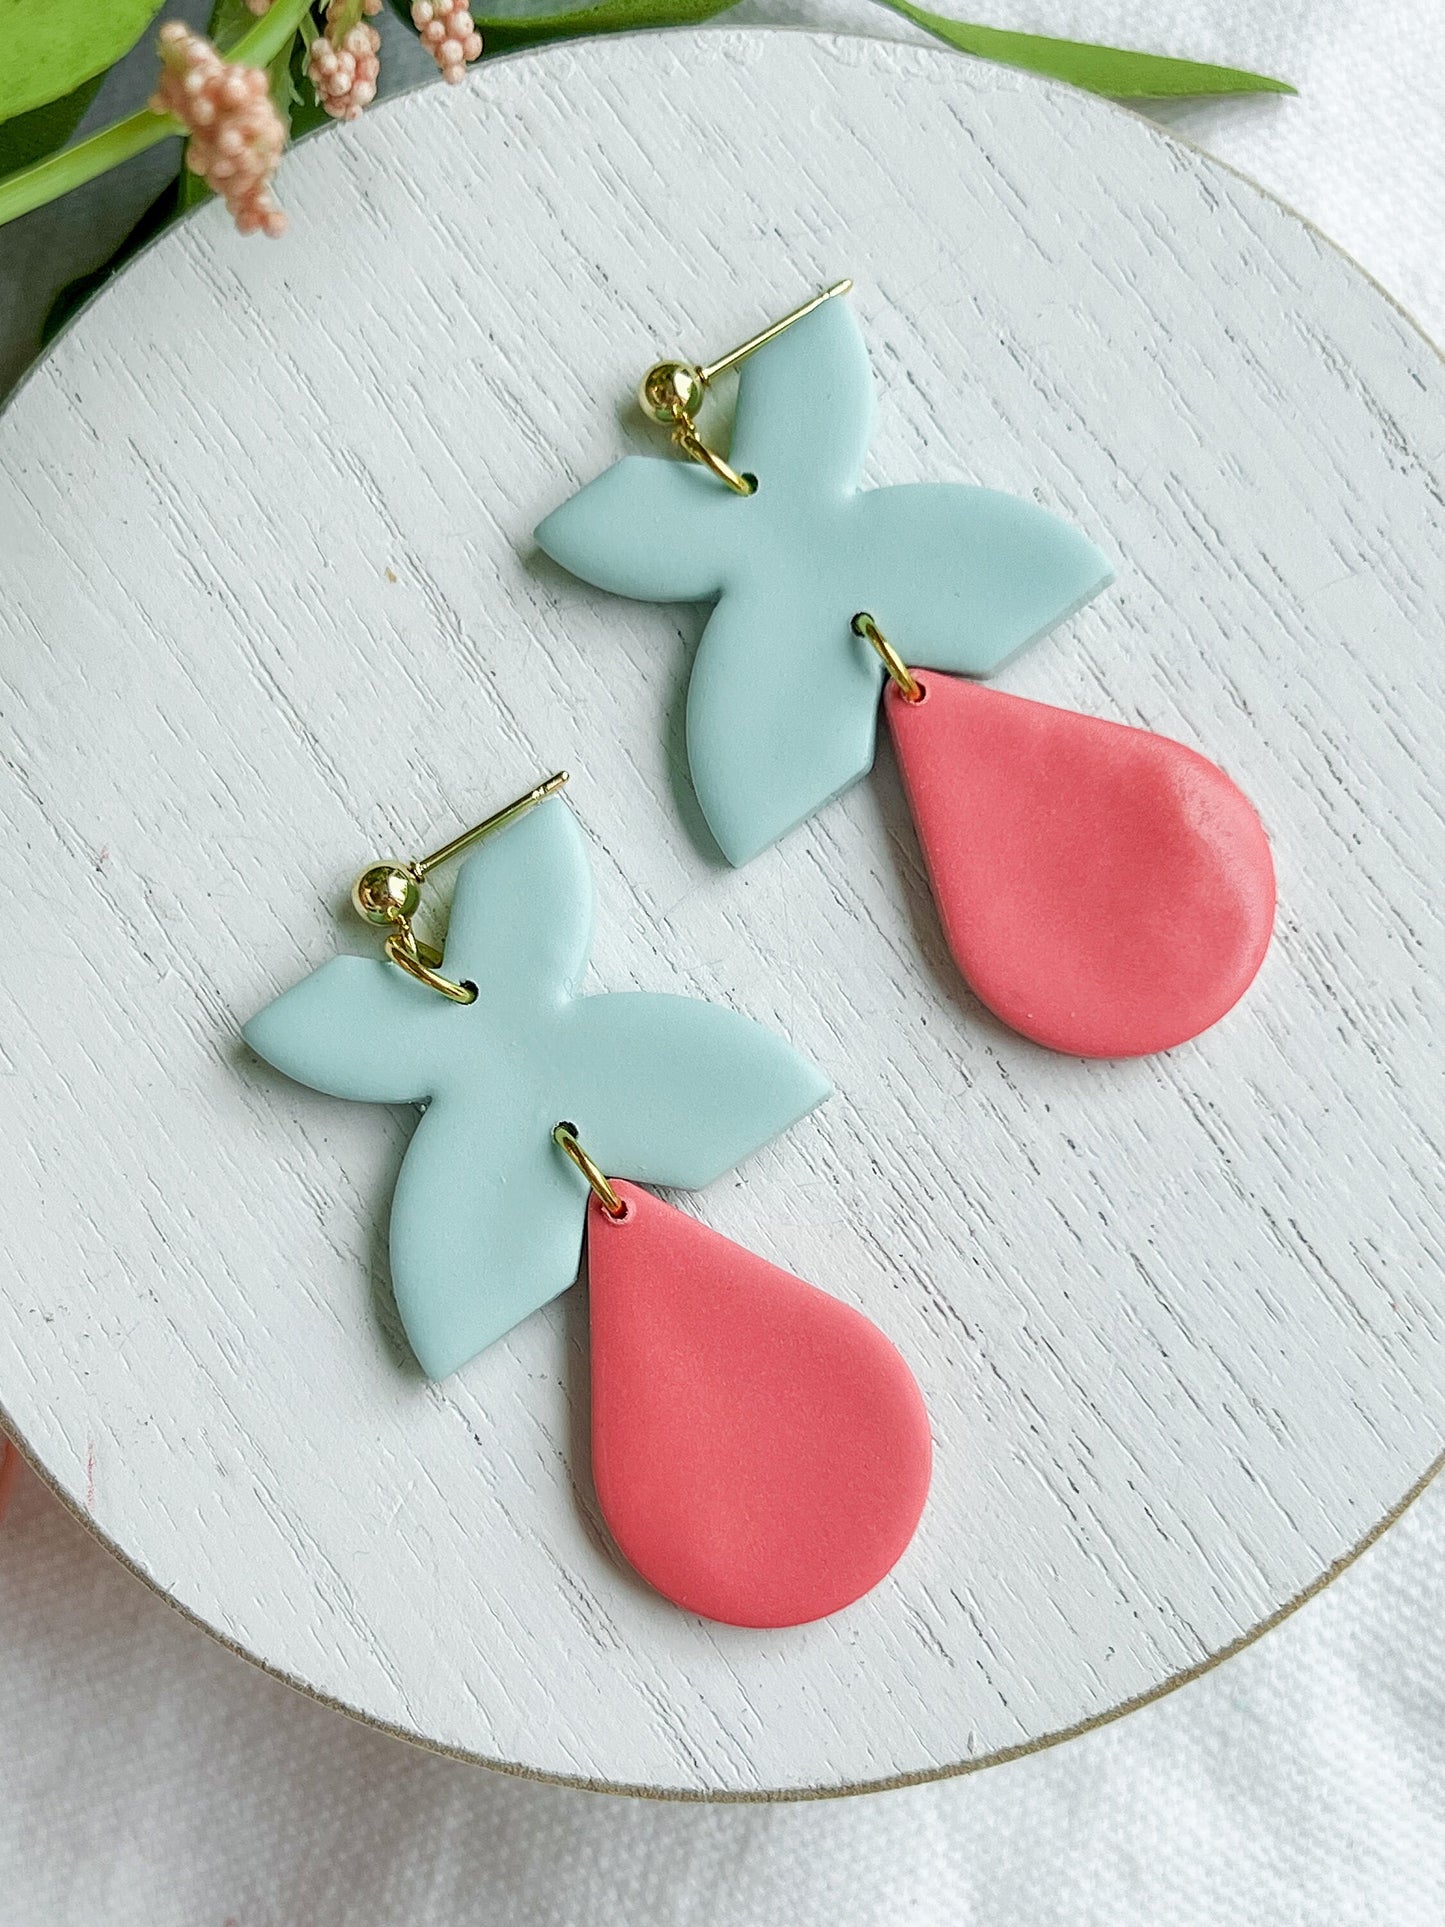 XO Teardrop Dangles in Coral and Turquoise